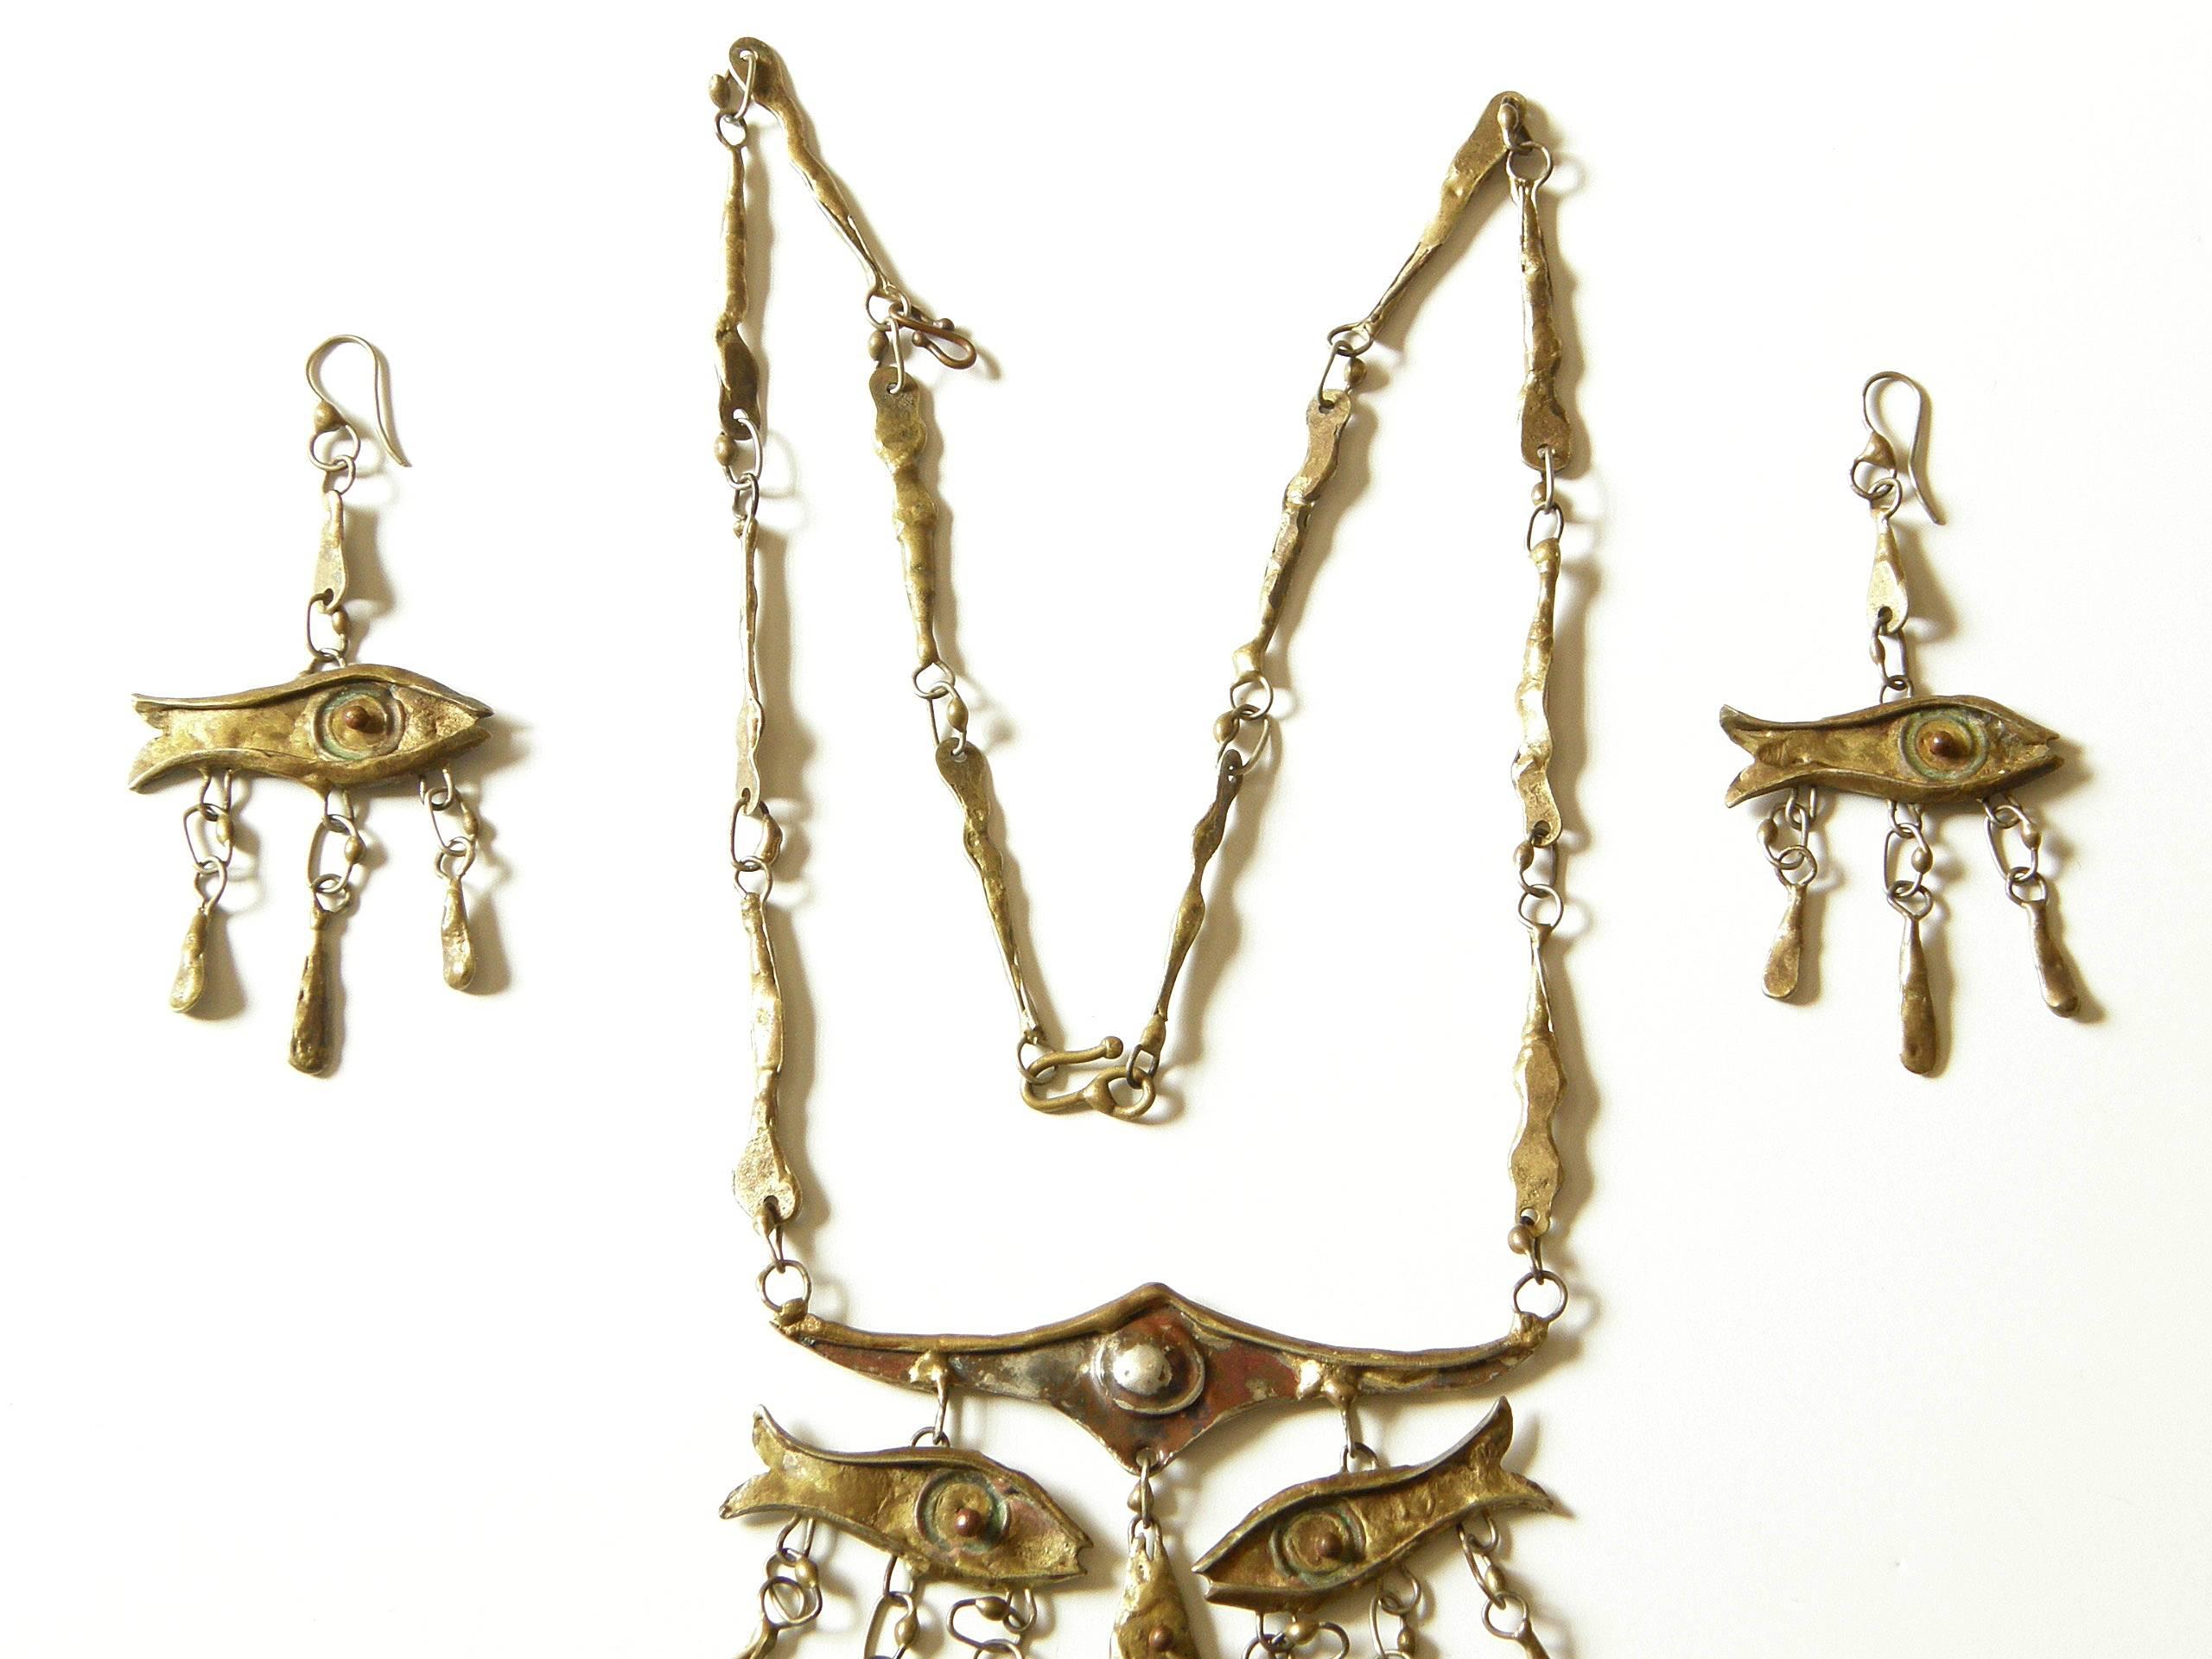 This unique necklace and earrings set was made by Mexican artist Armando Lozano Ramirez. The fish motif is utilized to great effect, creating an abstract face in the necklace. The dangling eyes and nose are fish, and a tiny puckered mouth is